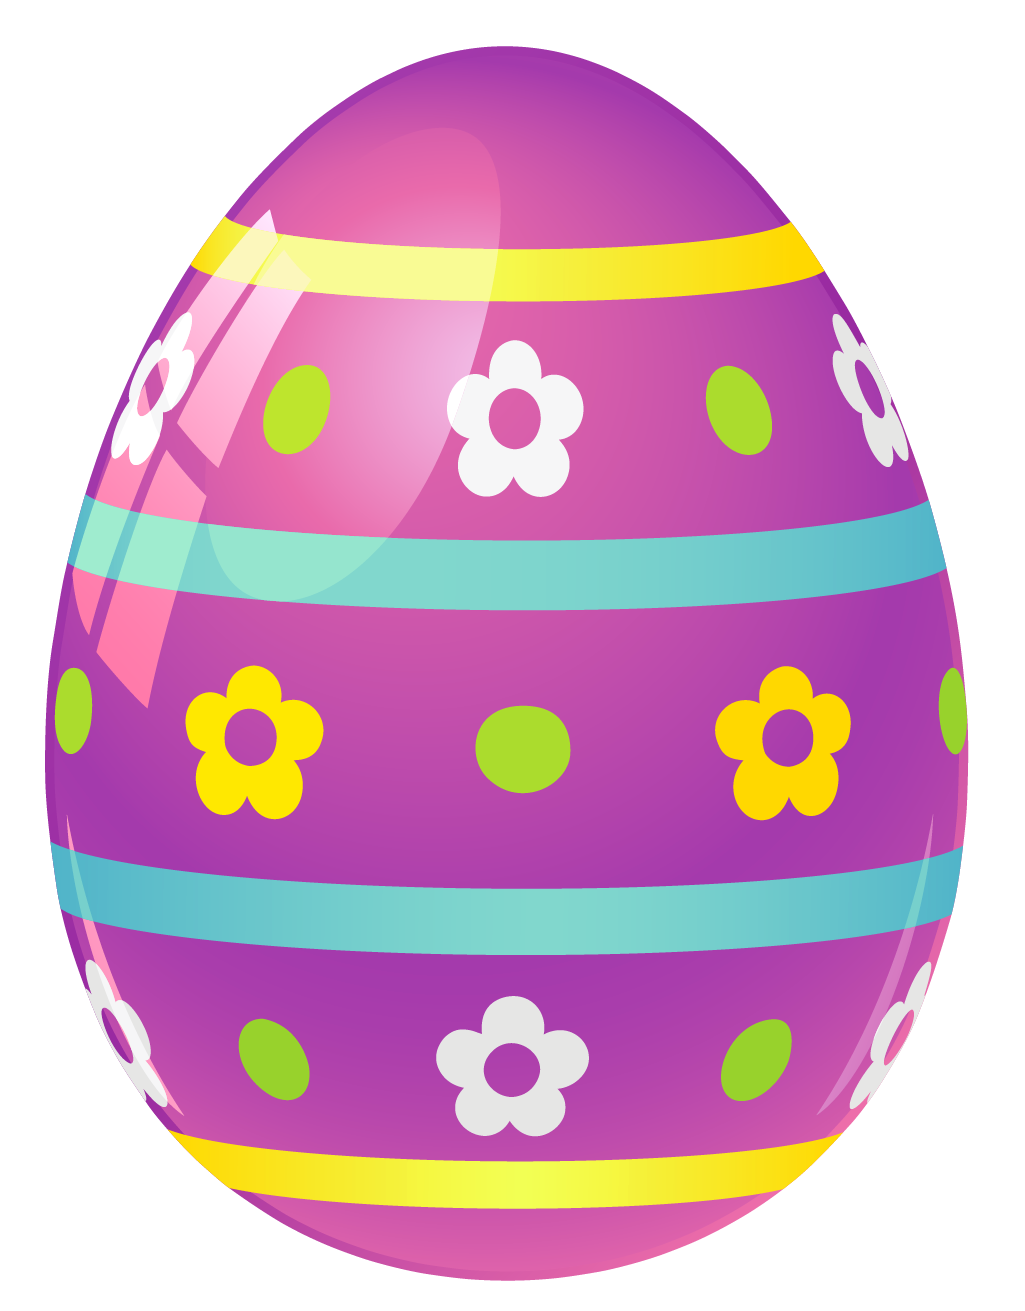 Download Egg Free PNG photo images and clipart